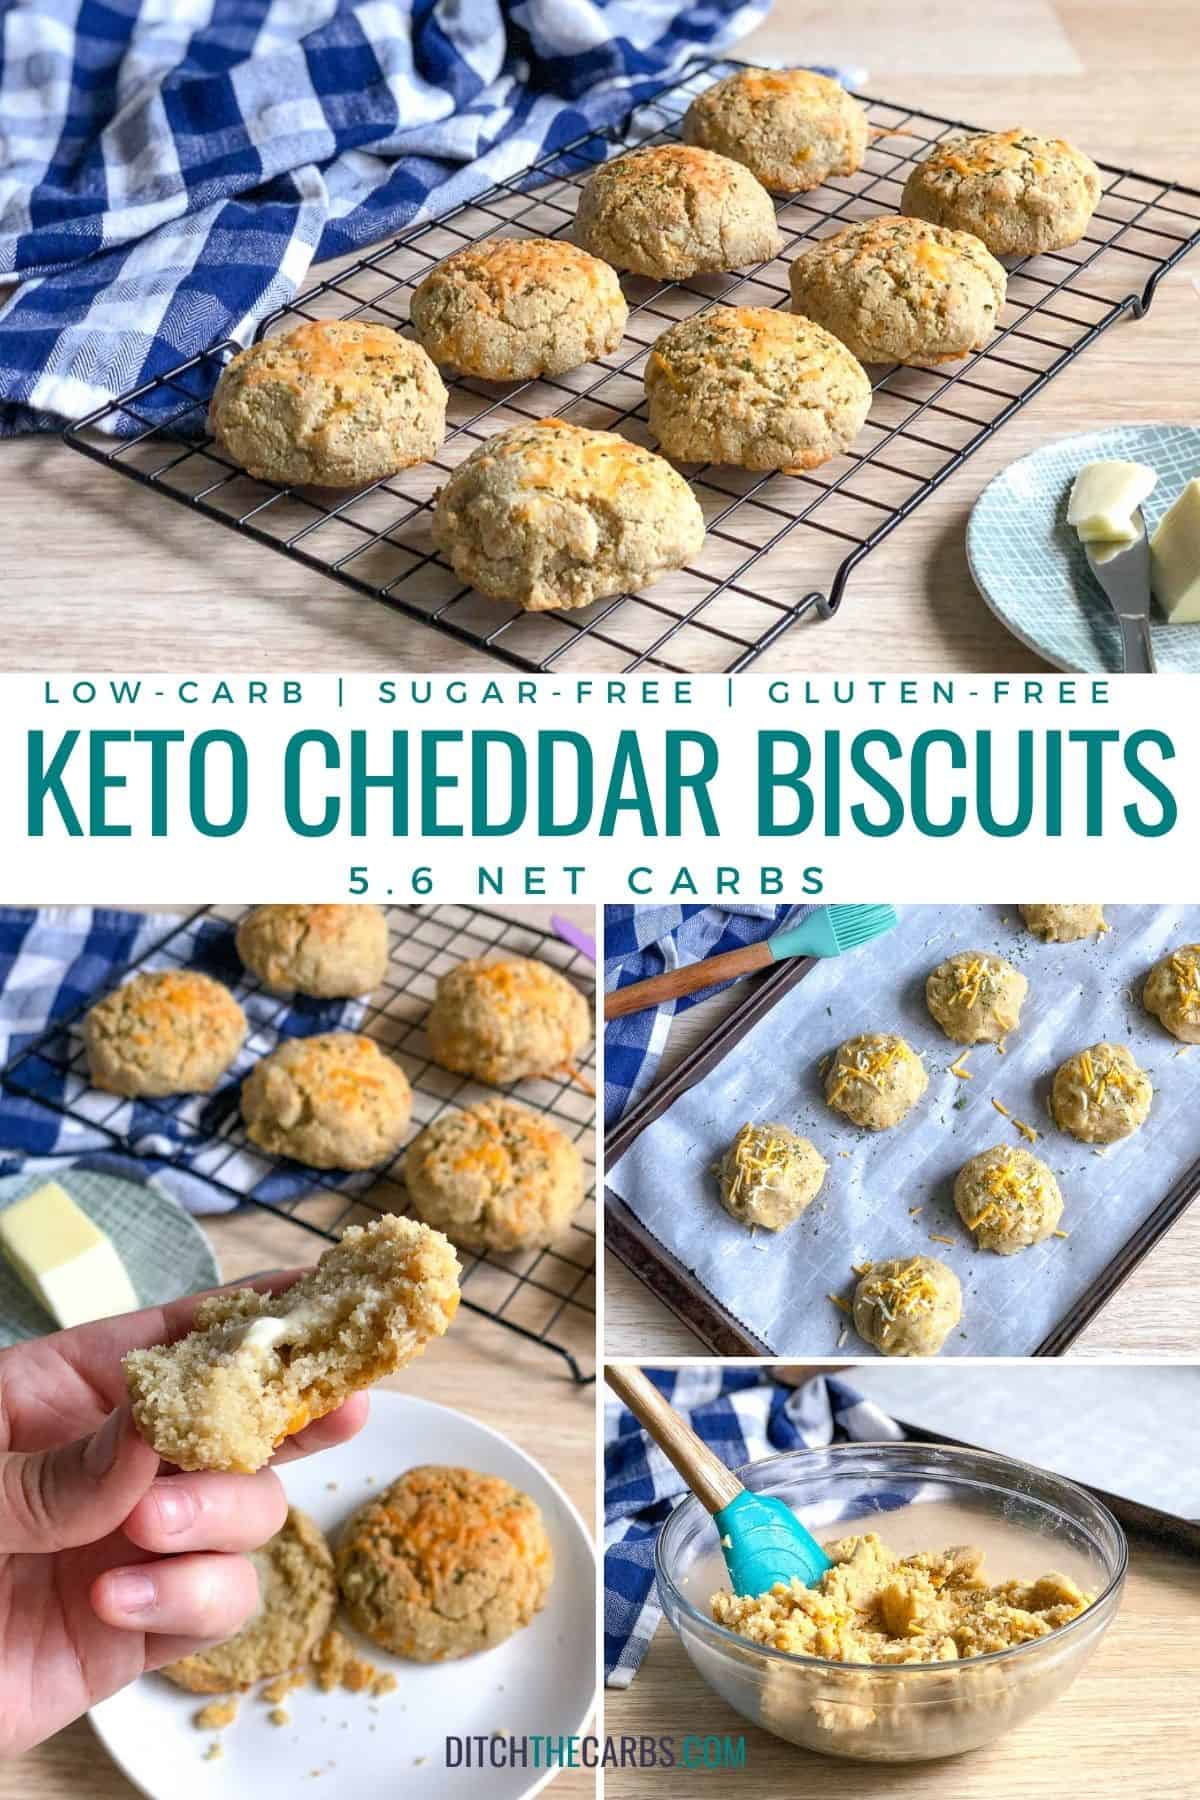 A collage of pictures showing stages of making keto cheddar biscuits.